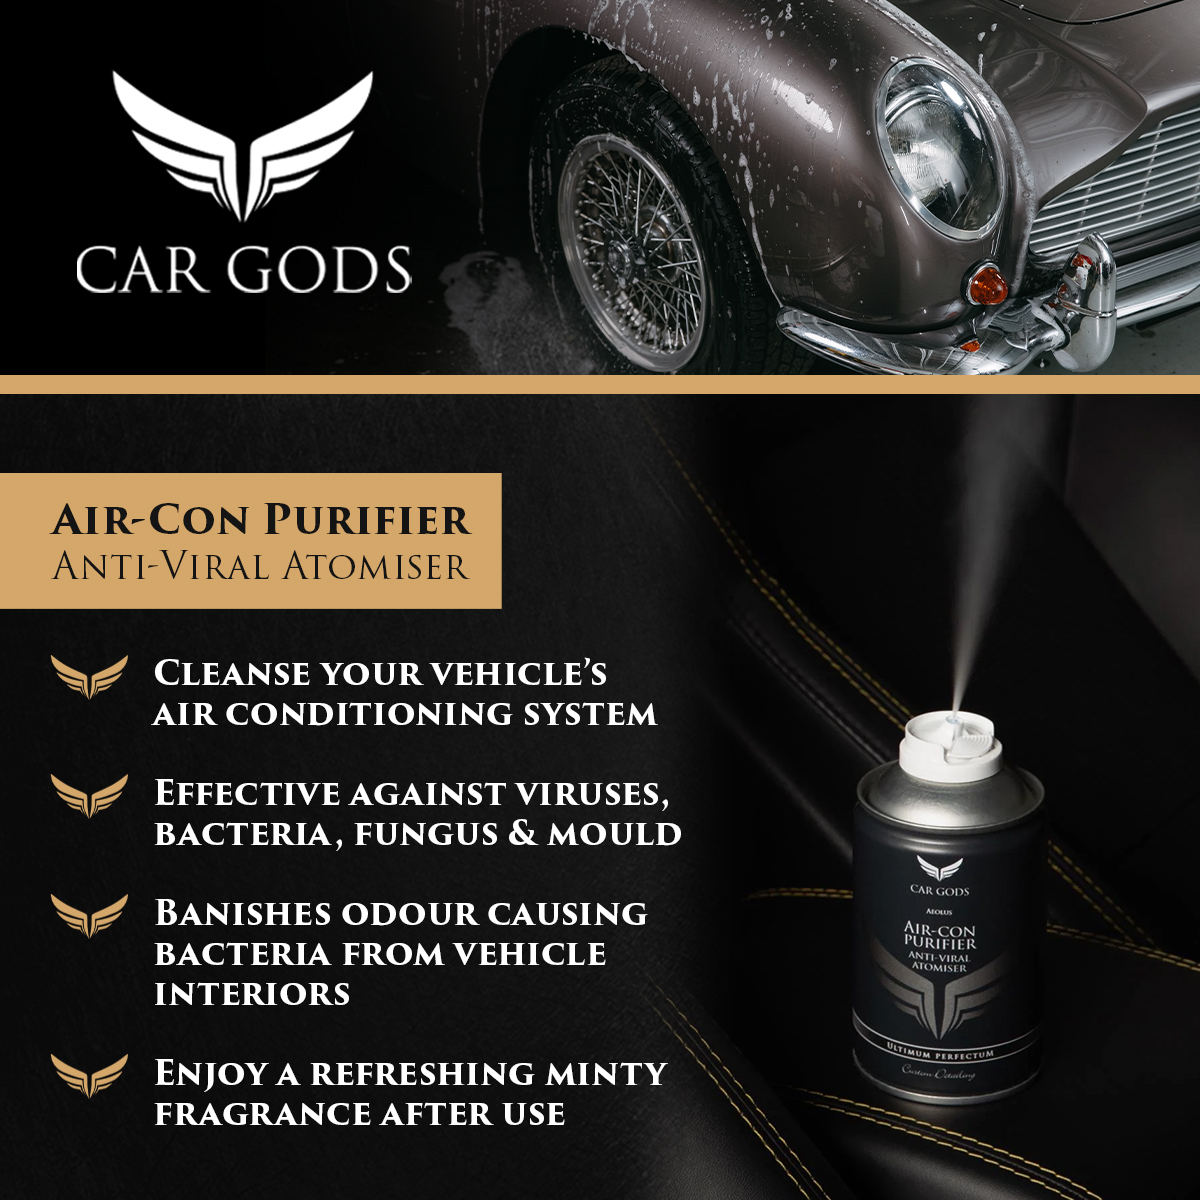 Car Gods Air-Con Purifier. Anti-viral atomiser. Cleanse your vehicle’s air conditioning system and banish odour-causing bacteria from your vehicle’s interior. Enjoy a refreshing minty fragrance from a formula that is effective against viruses, bacteria, fungus & mould.